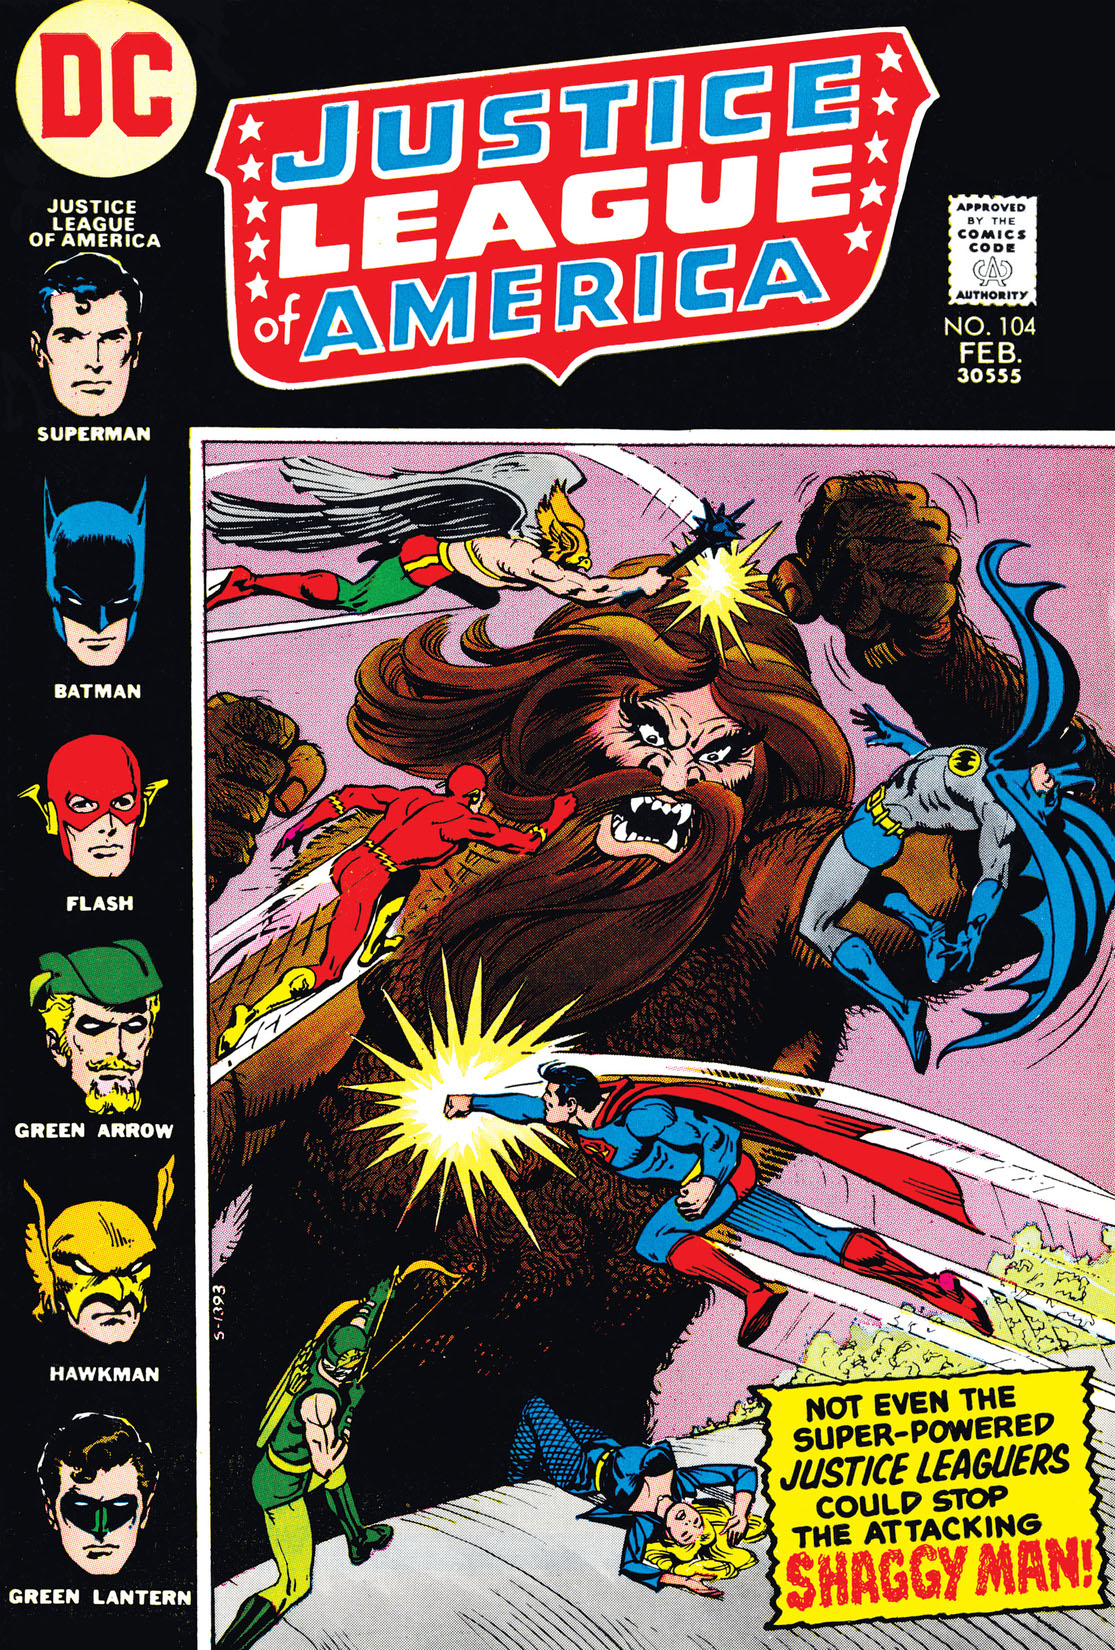 Justice League of America (1960-) #104 preview images